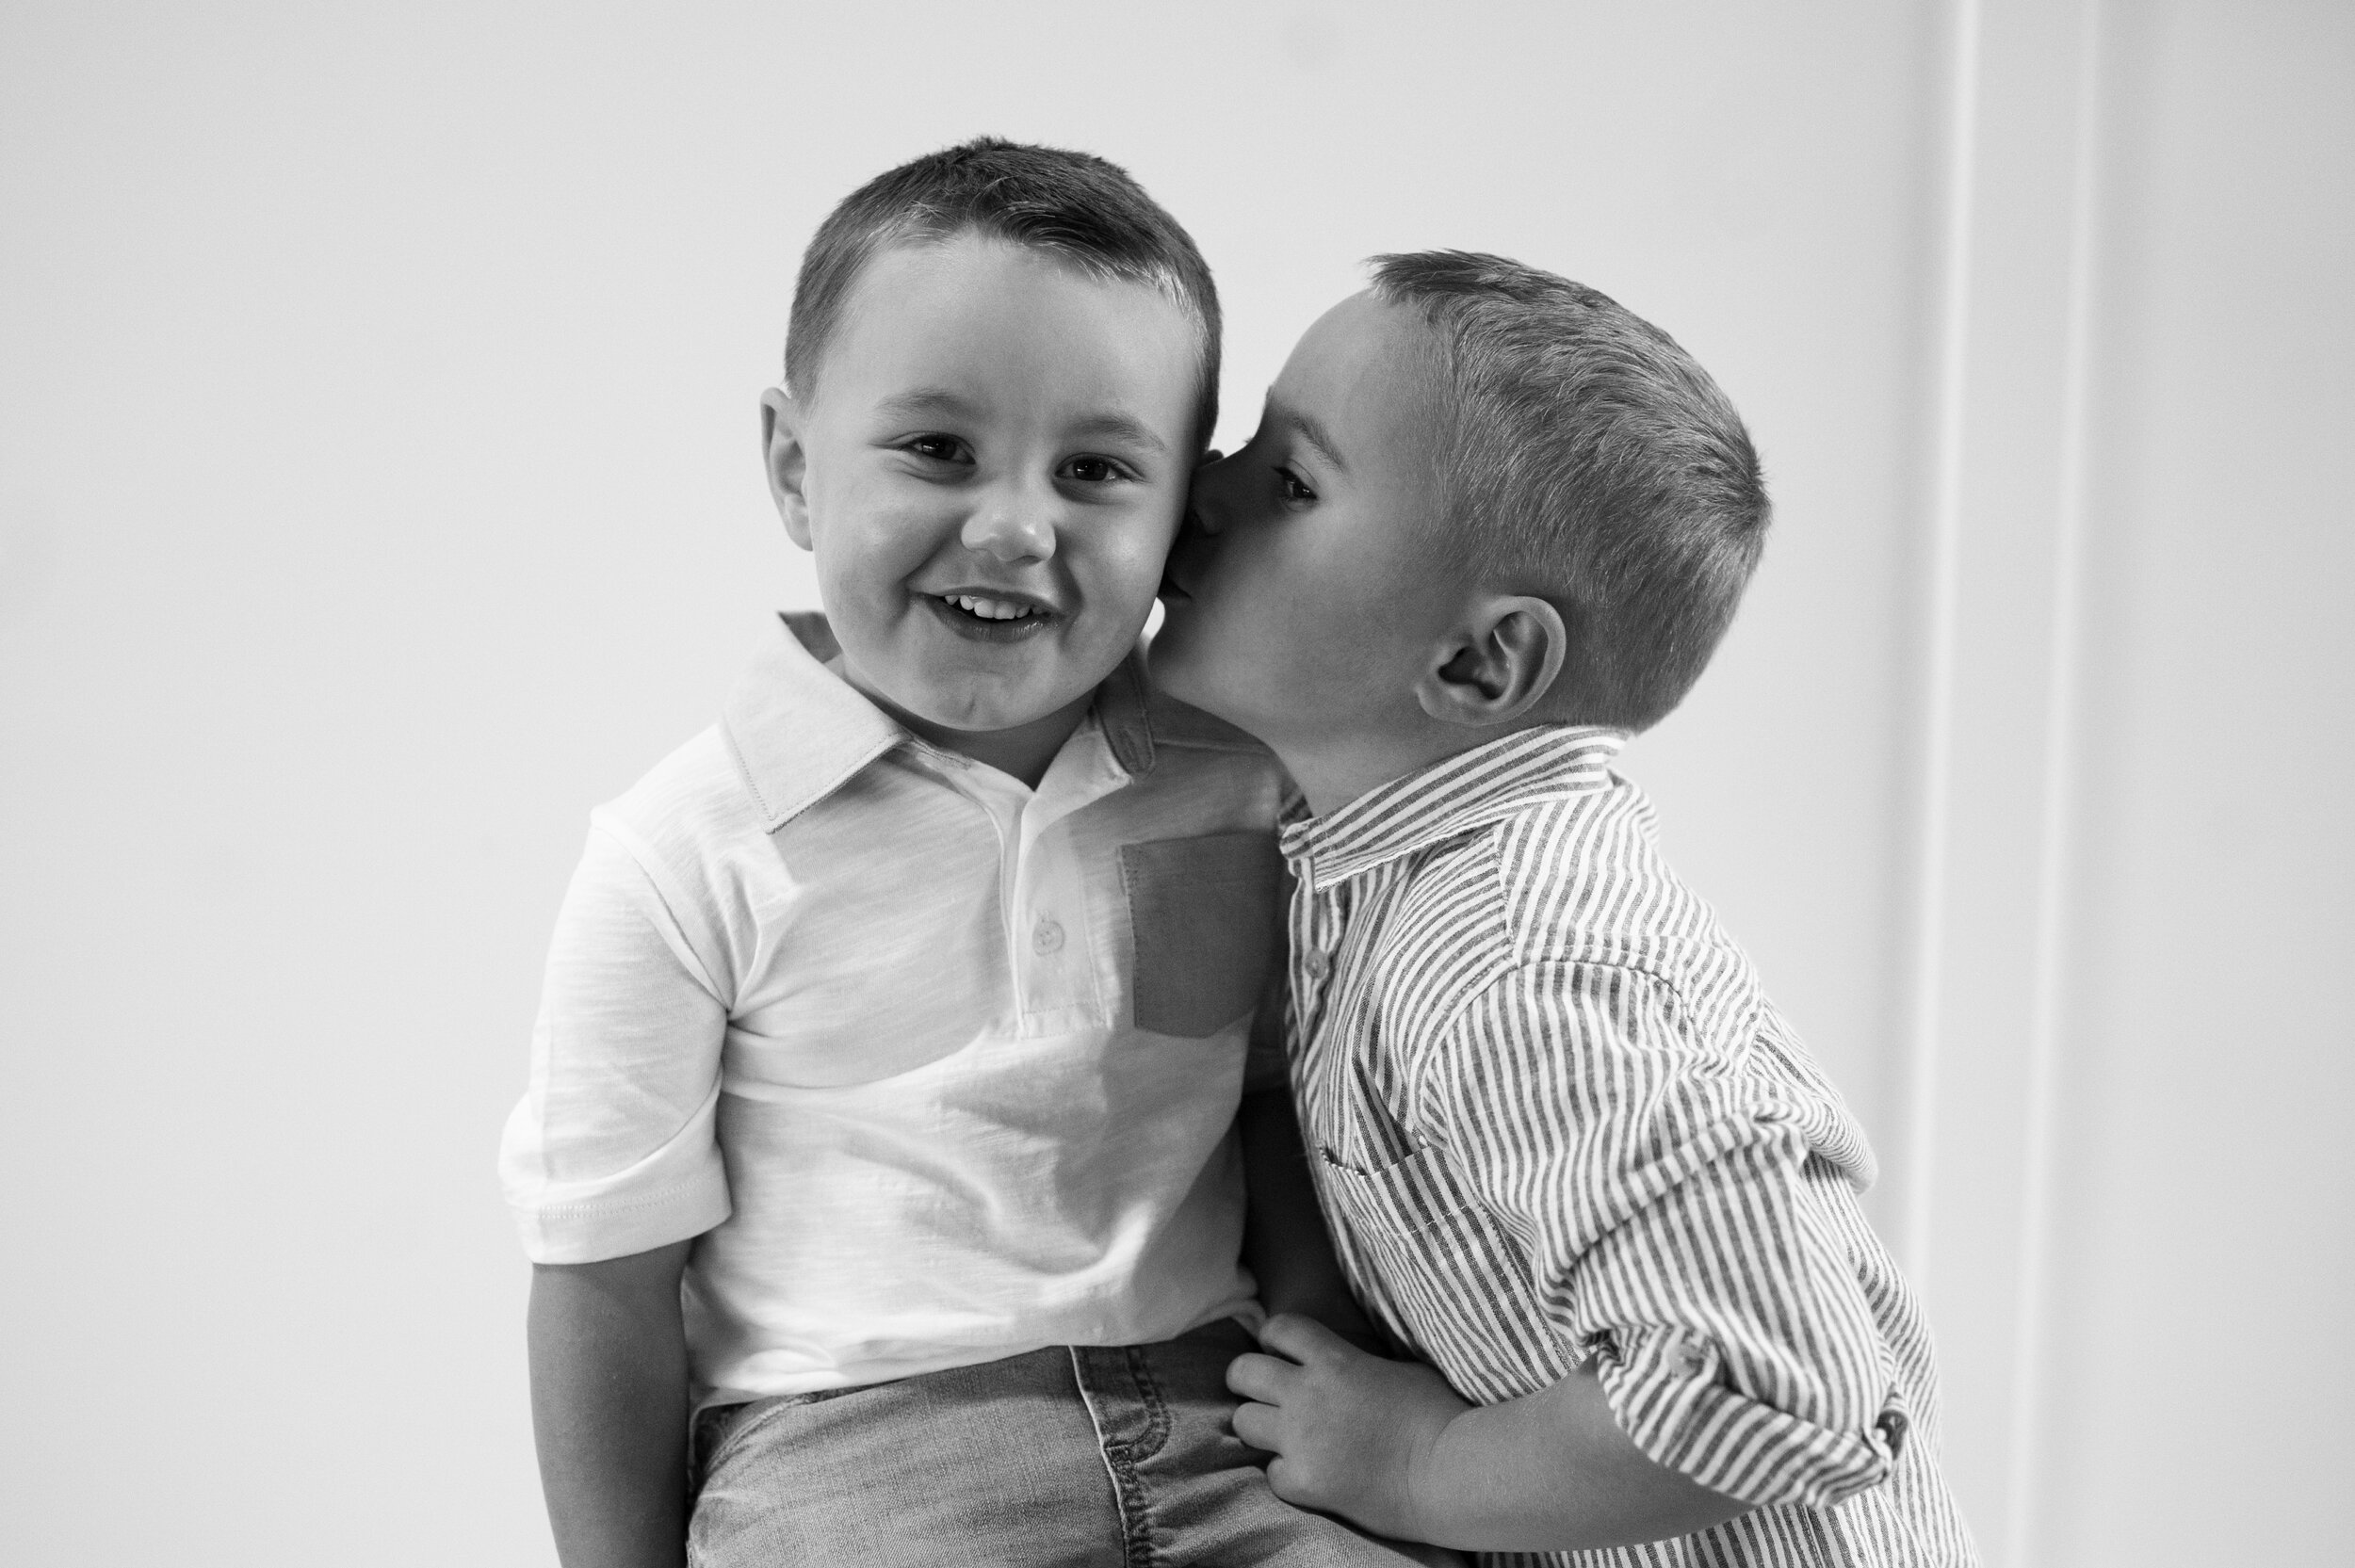 Black and white photo of two boys in white t-shirts. One is kissing the other on the cheek.